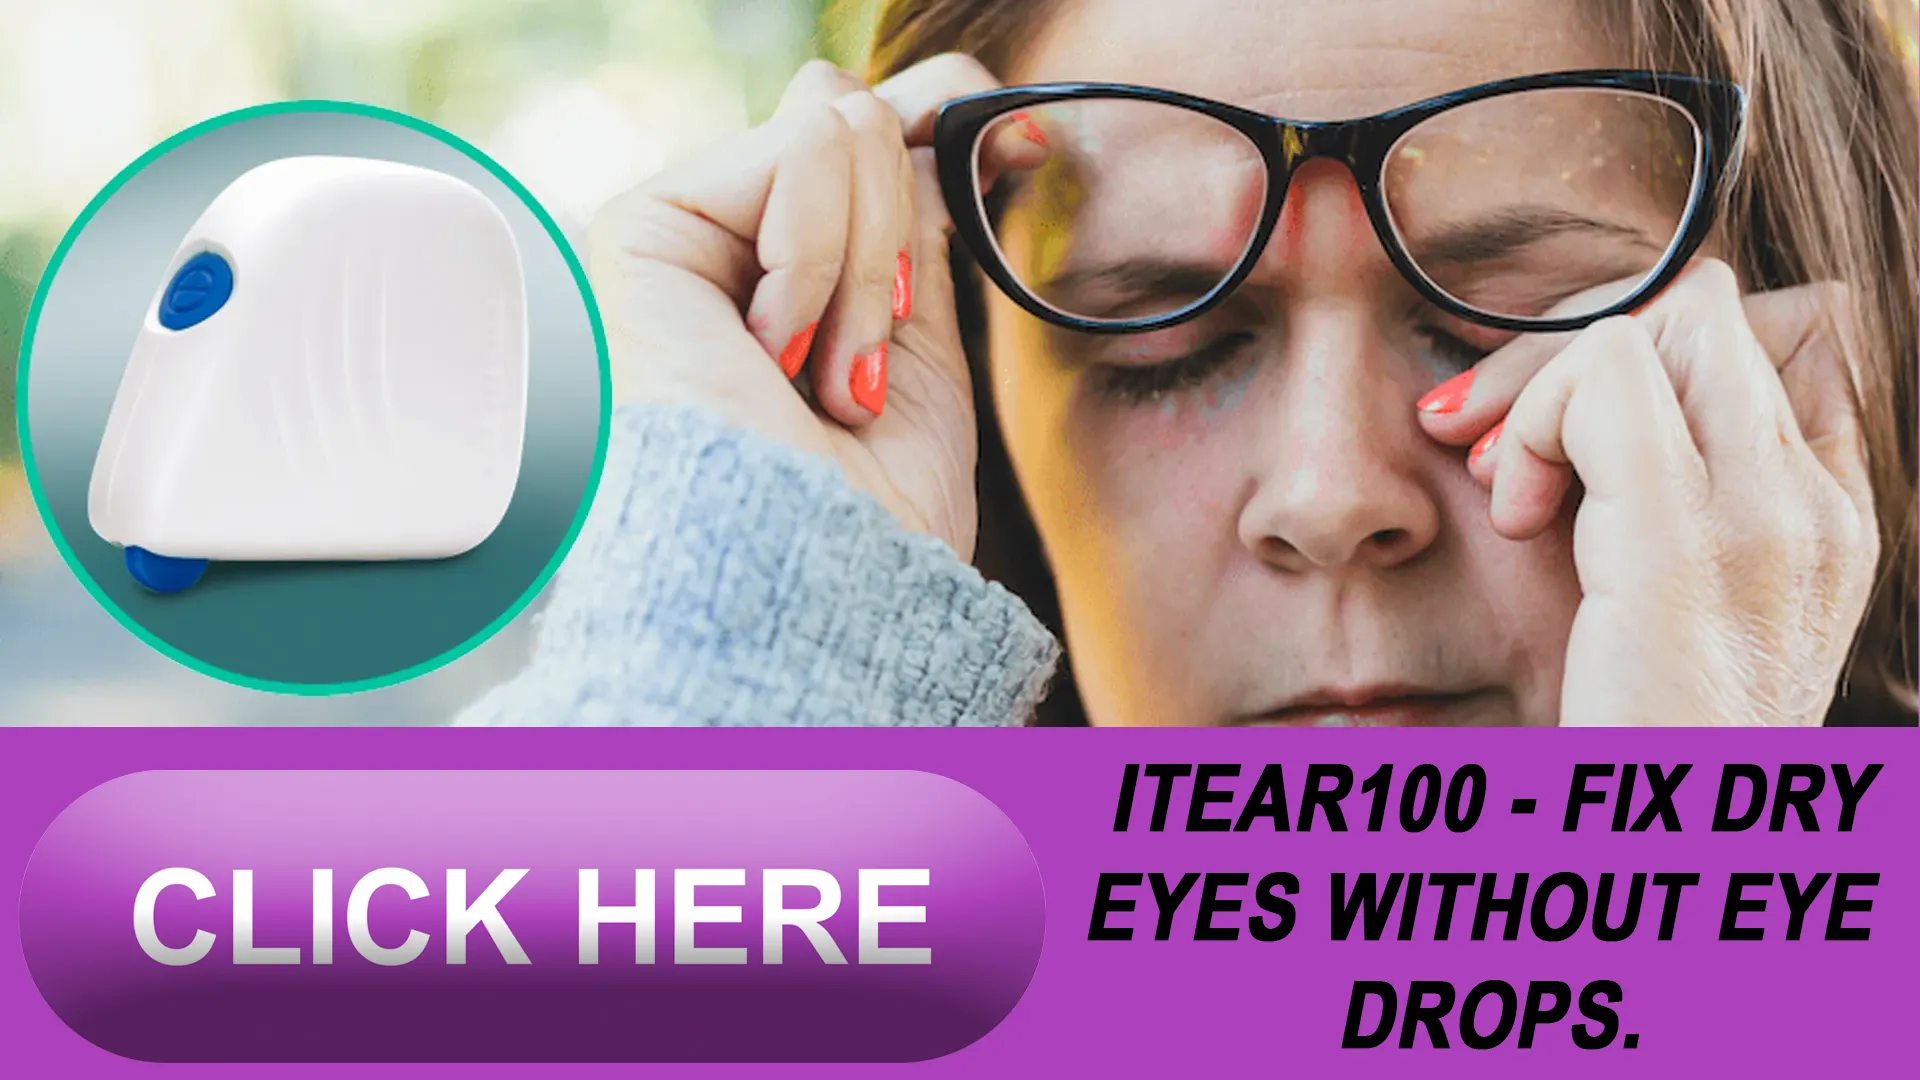 Breaks and Exercises for Eye Relief